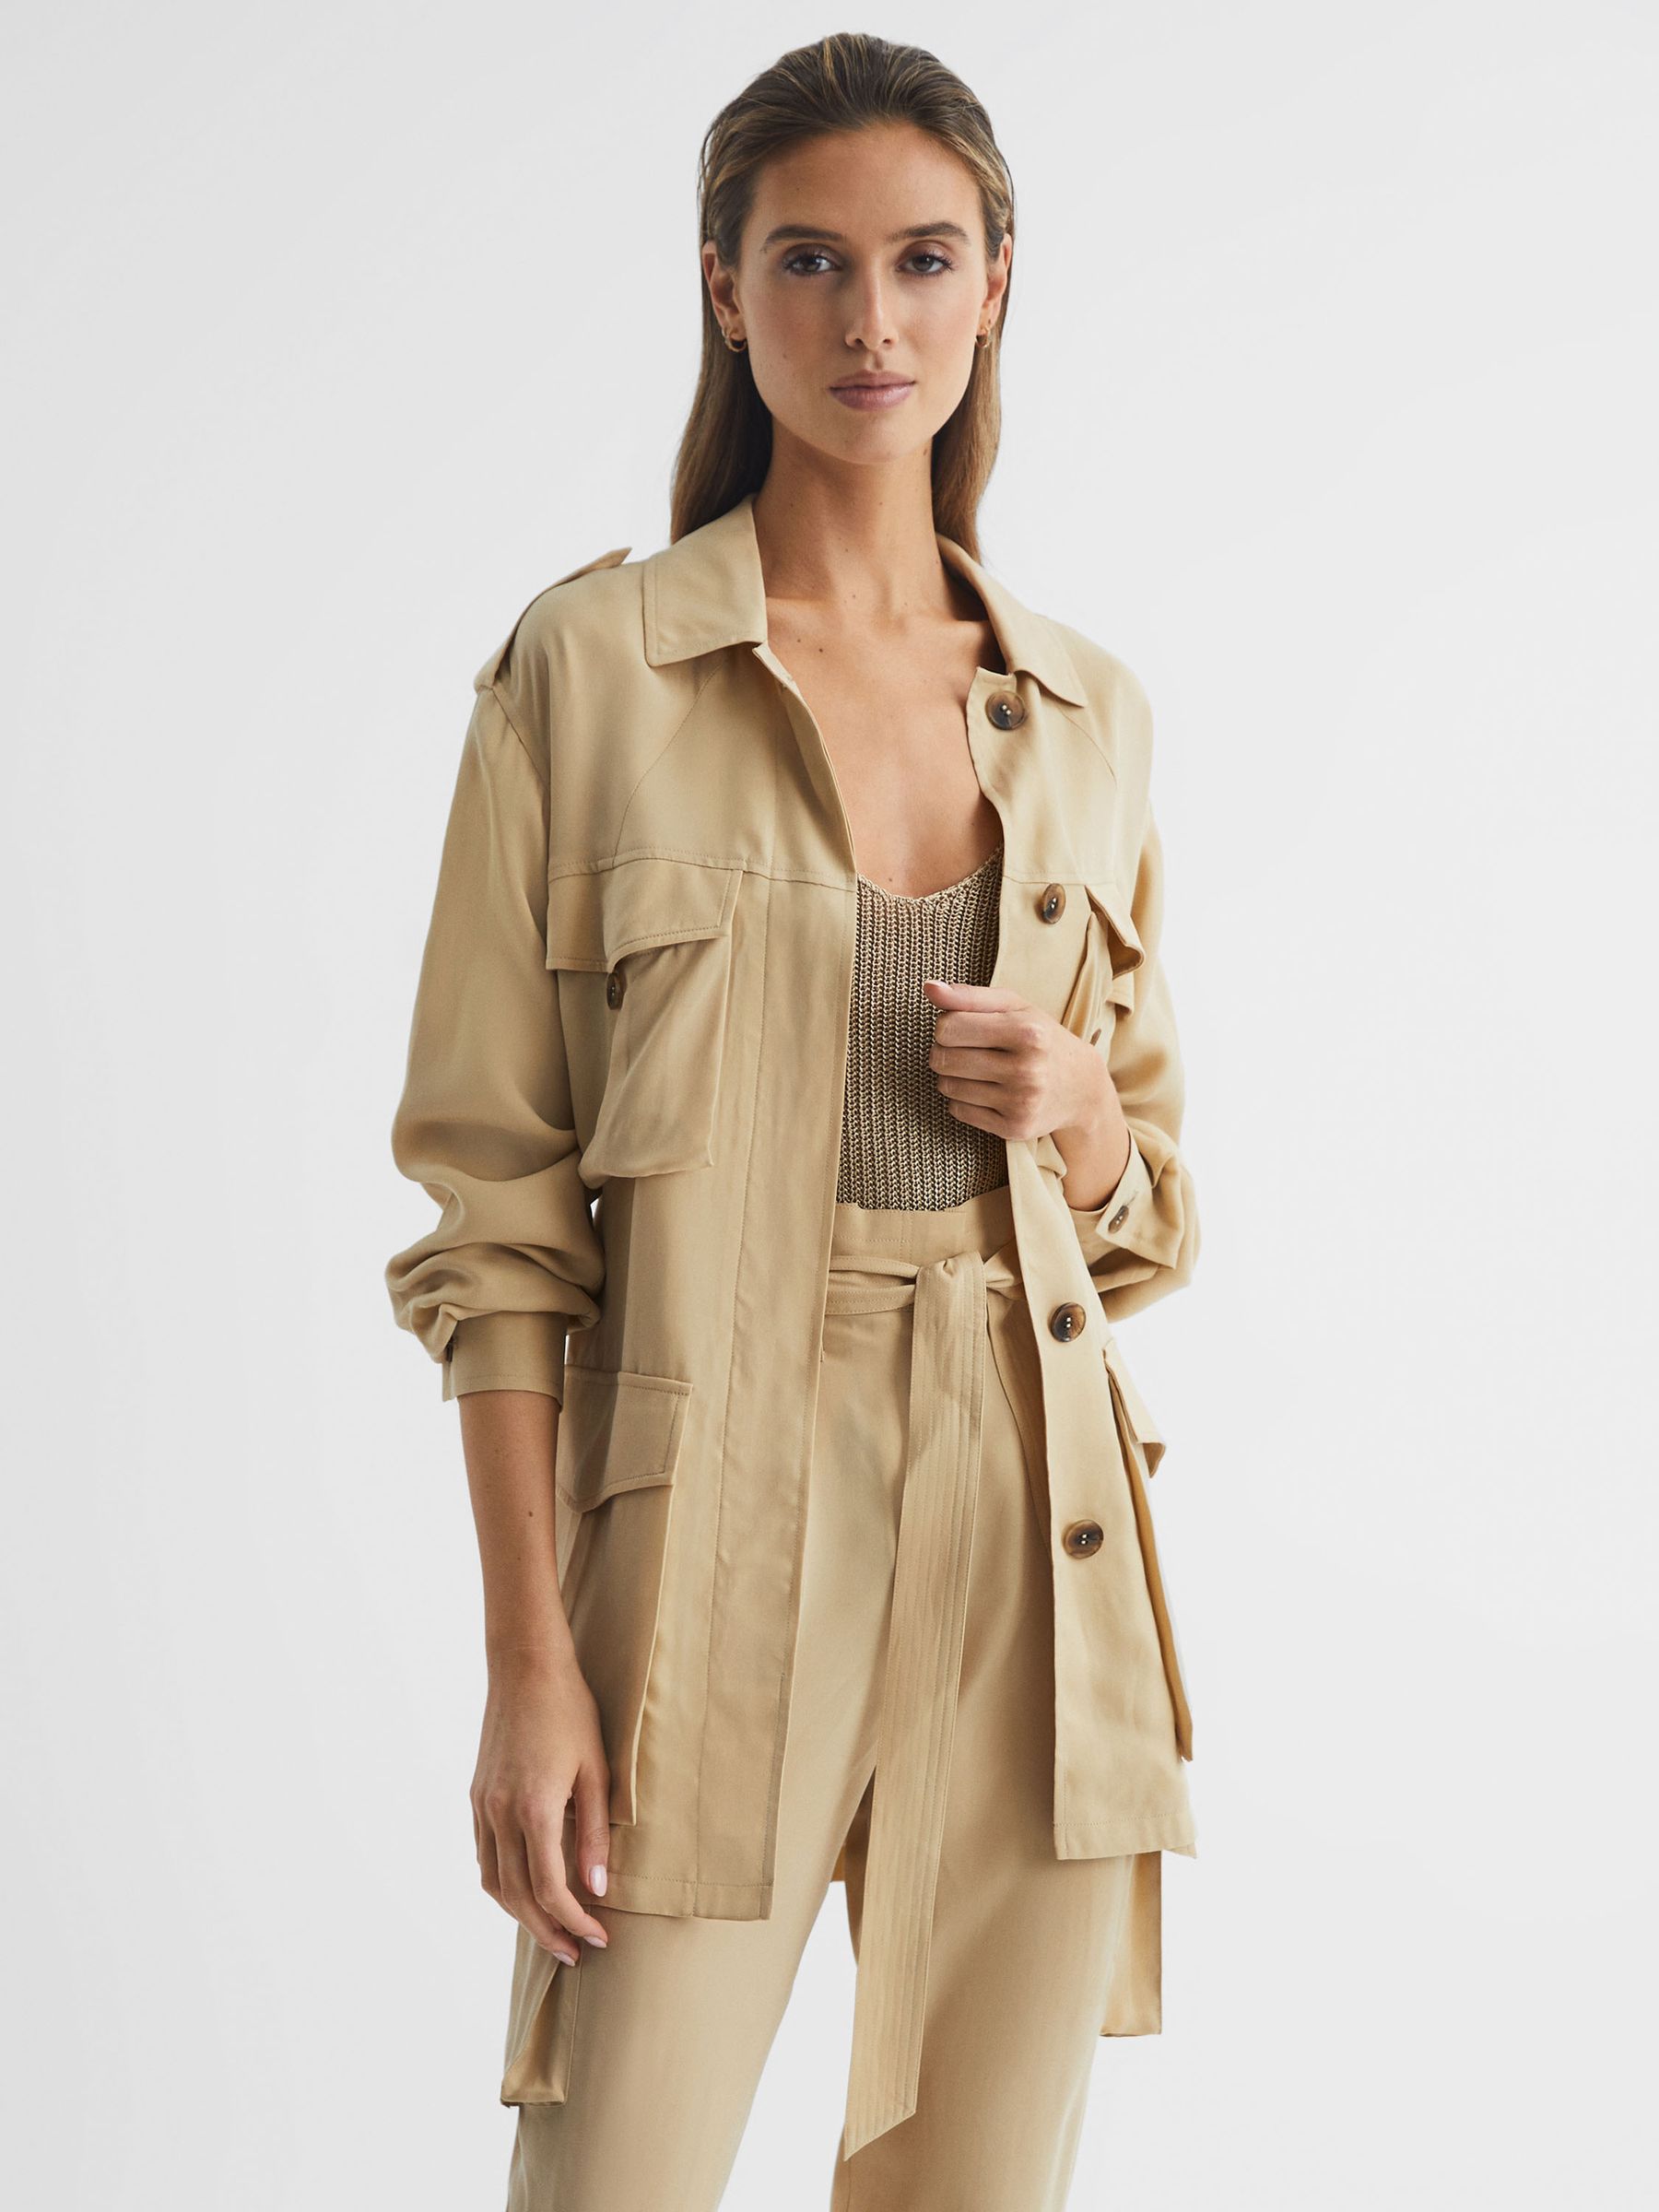 Reiss Joanie Relaxed Fit Utility Jacket - REISS